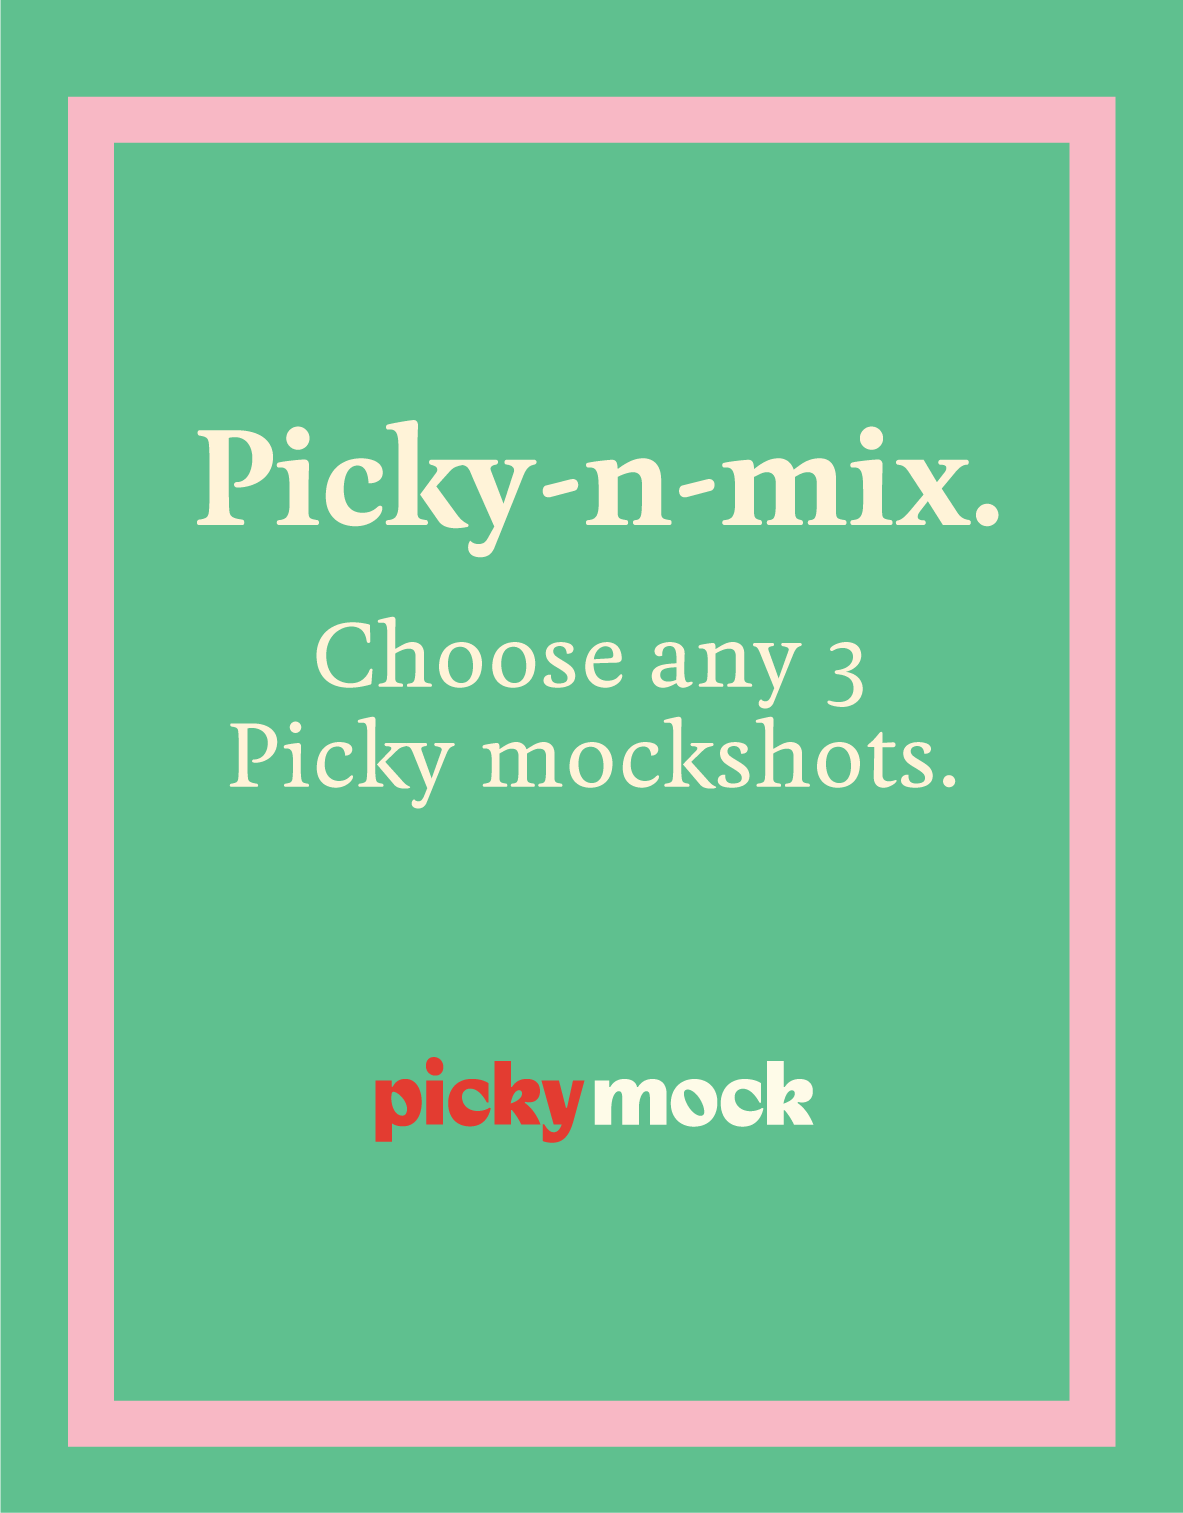 Green portrait box with bright pink thick line inside the box. Words 'picky-n-mix choose any three mockshots' written in a beige font. Picky Mock logo in the bottom middle of the frame, above green line. 